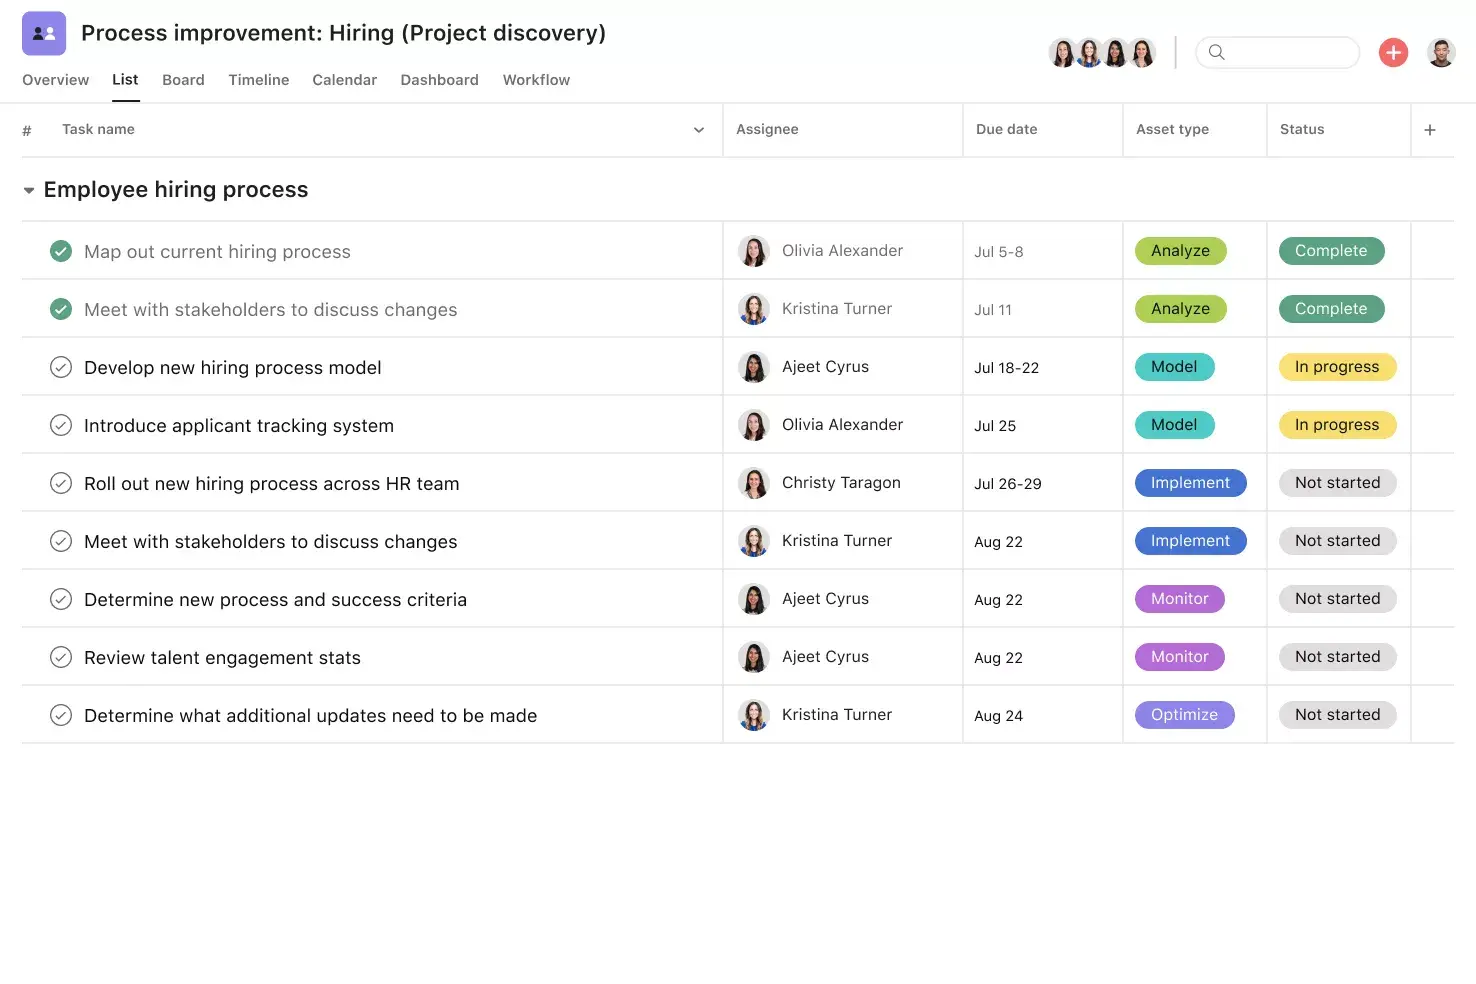 [Product UI] Business process management project in Asana, unsorted, spreadsheet-style project view (list)